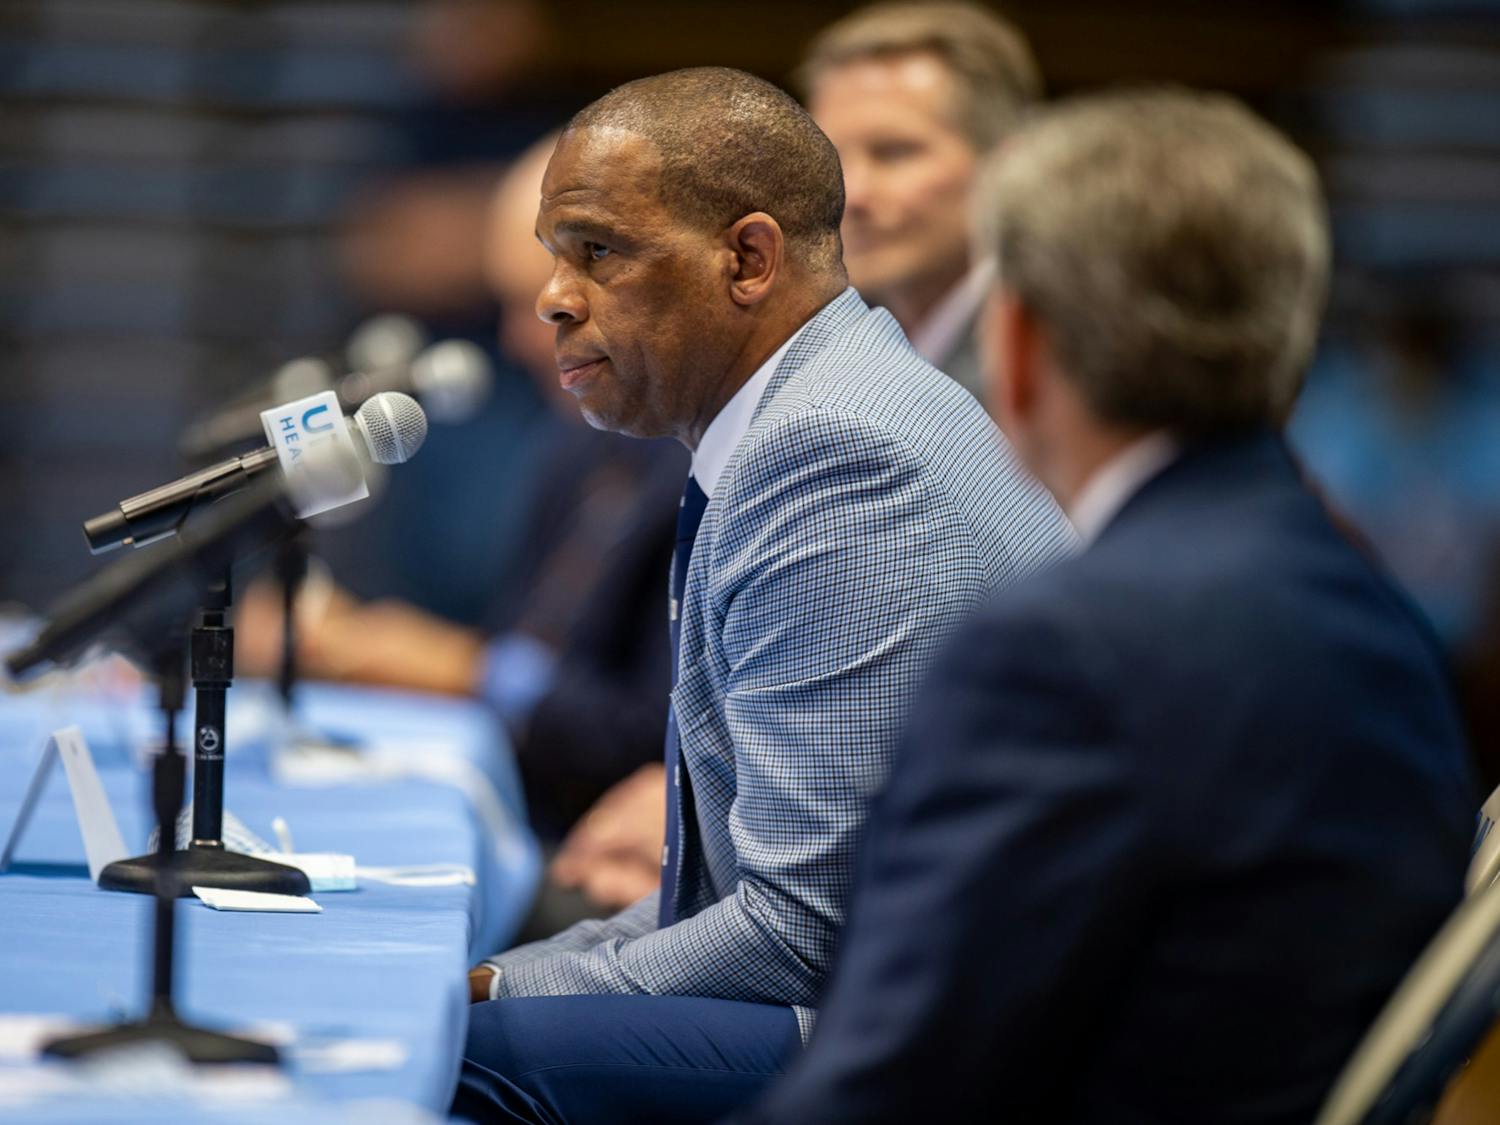 UNC Men's Basketball Head Coach Hubert Davis delivers remarks during his introductory press conference.